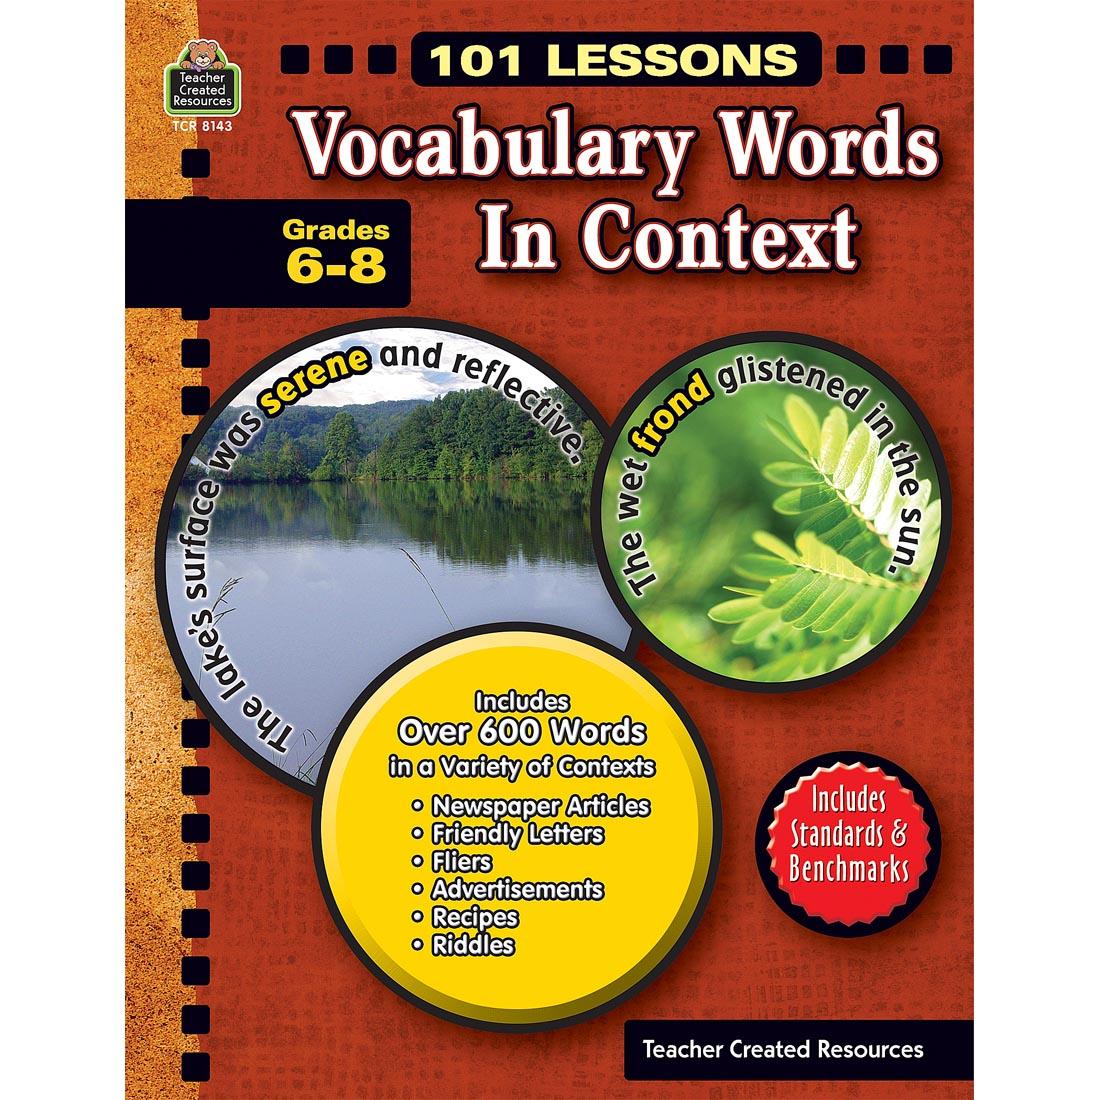 101 Lessons Vocabulary Words in Context Grades 6-8